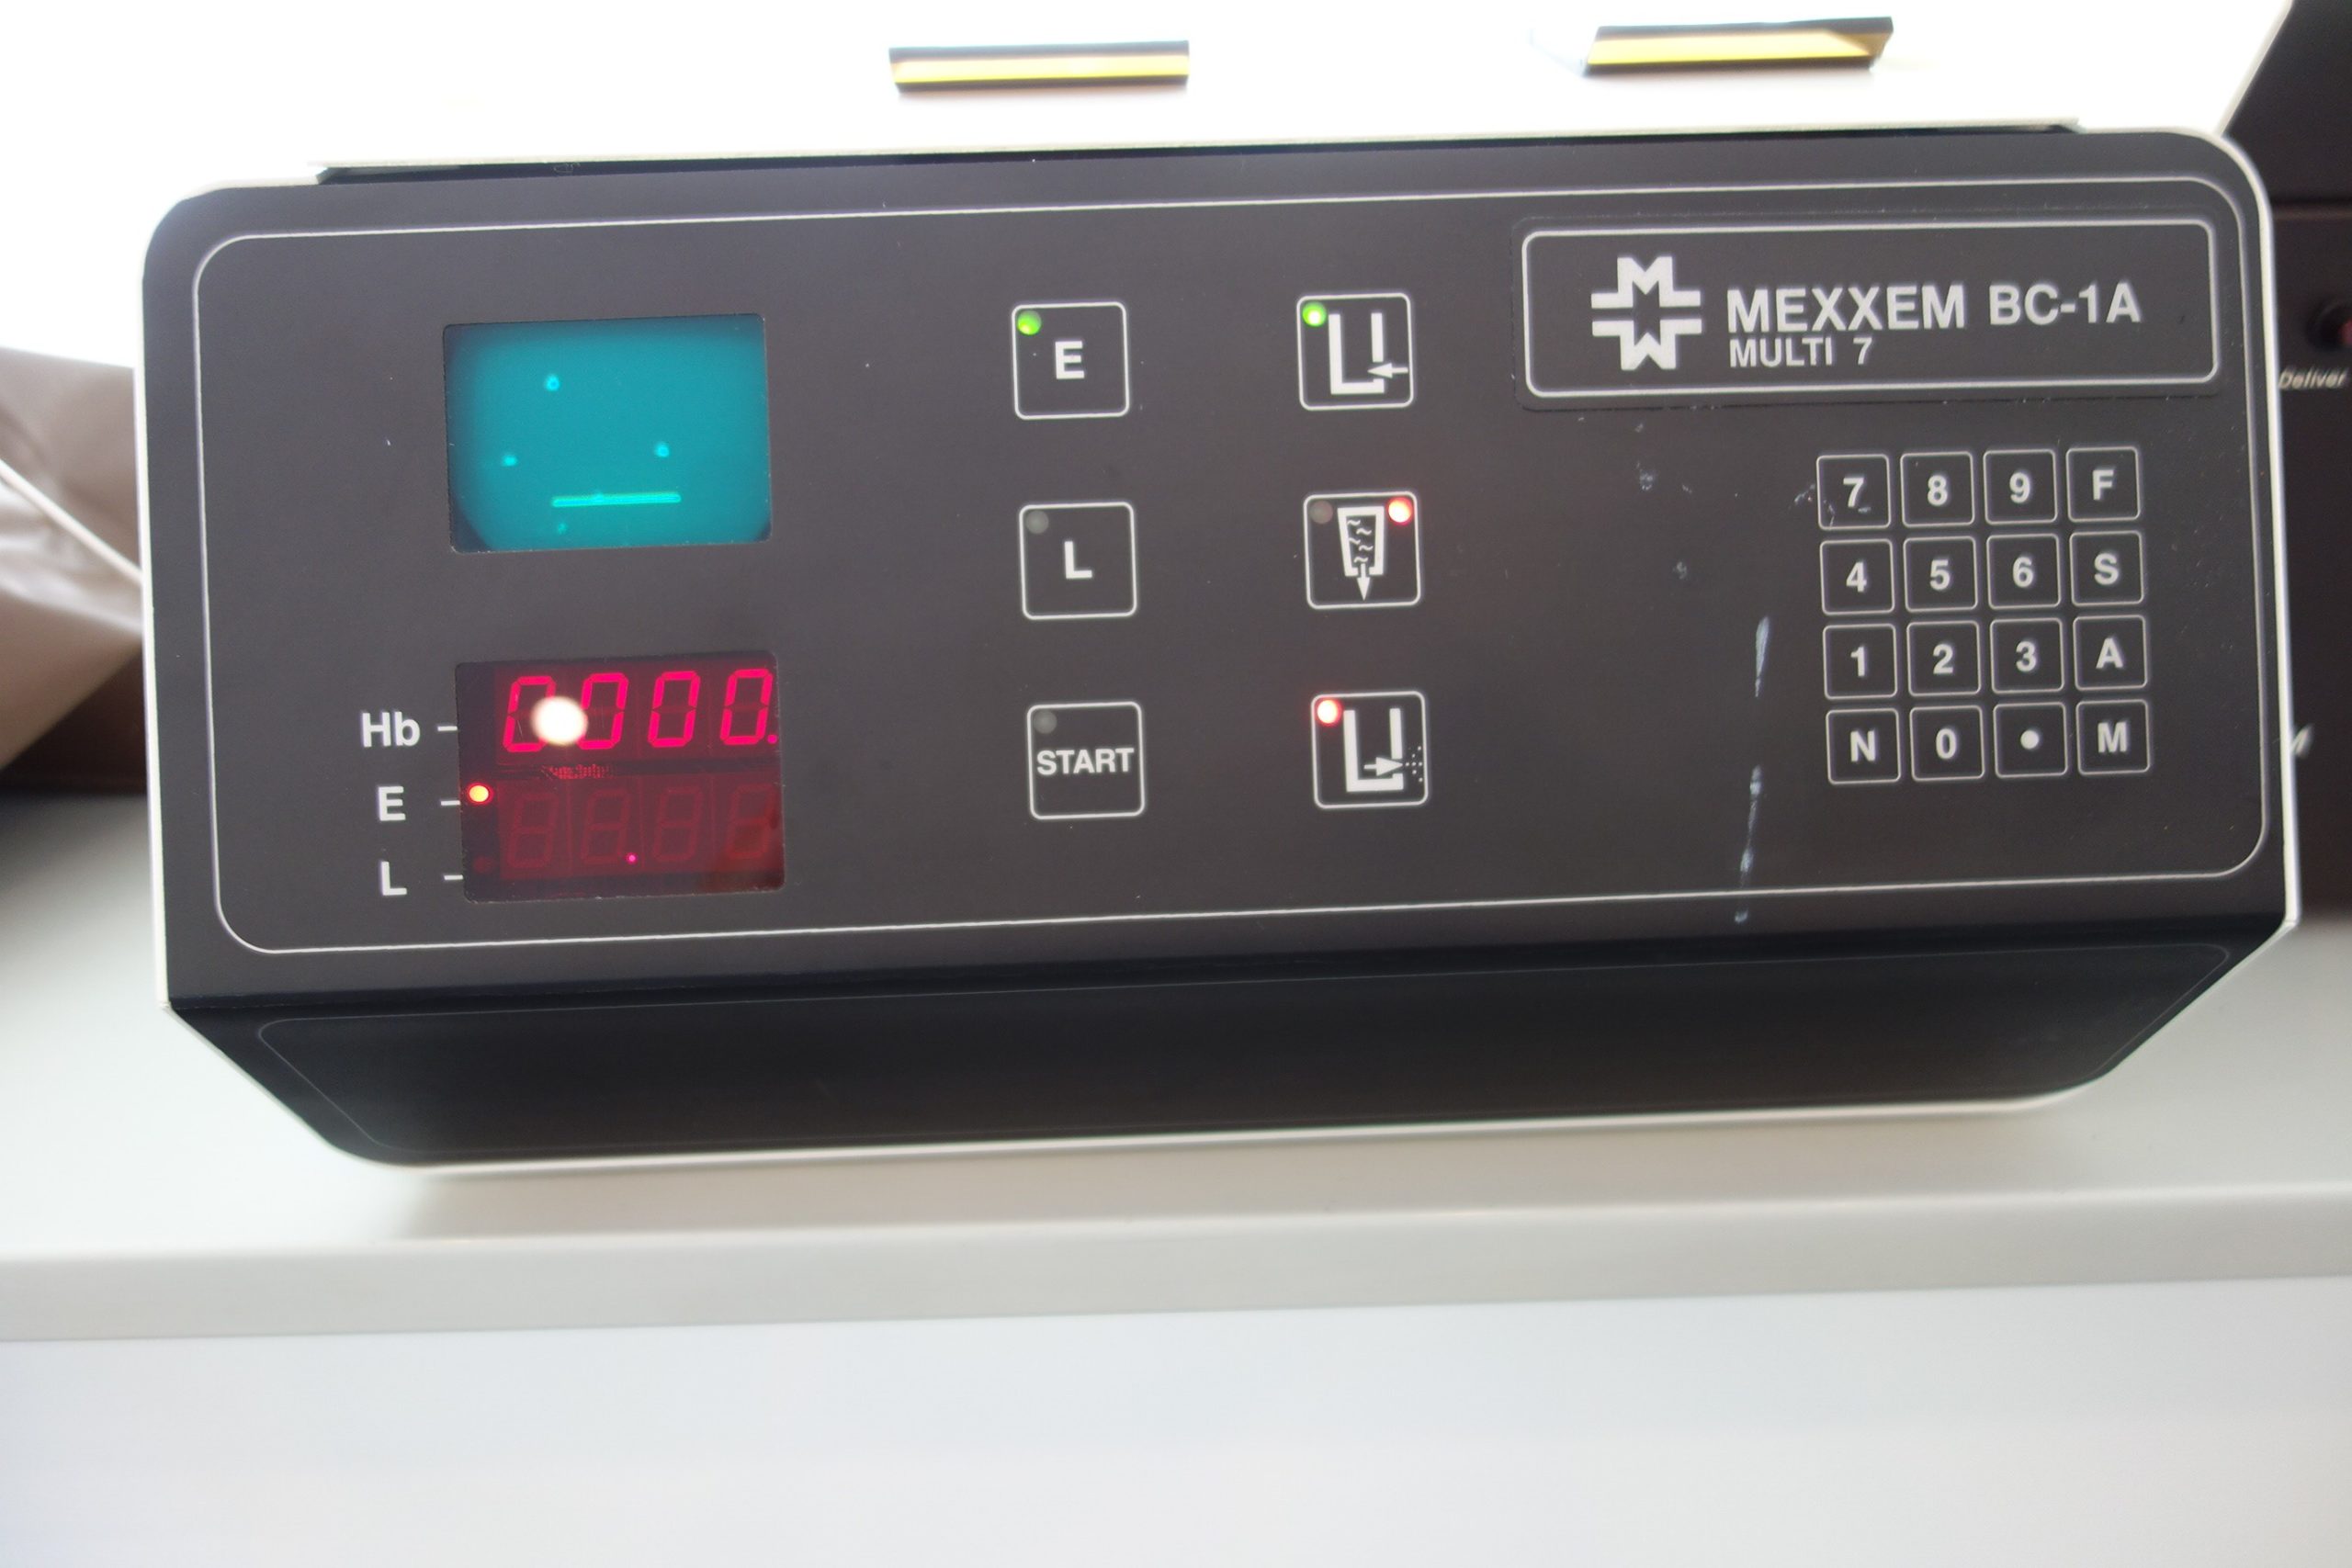 mexxem-hematology-systems-bc-1a-multi-7-mit-diluter-power-print-unit-4607